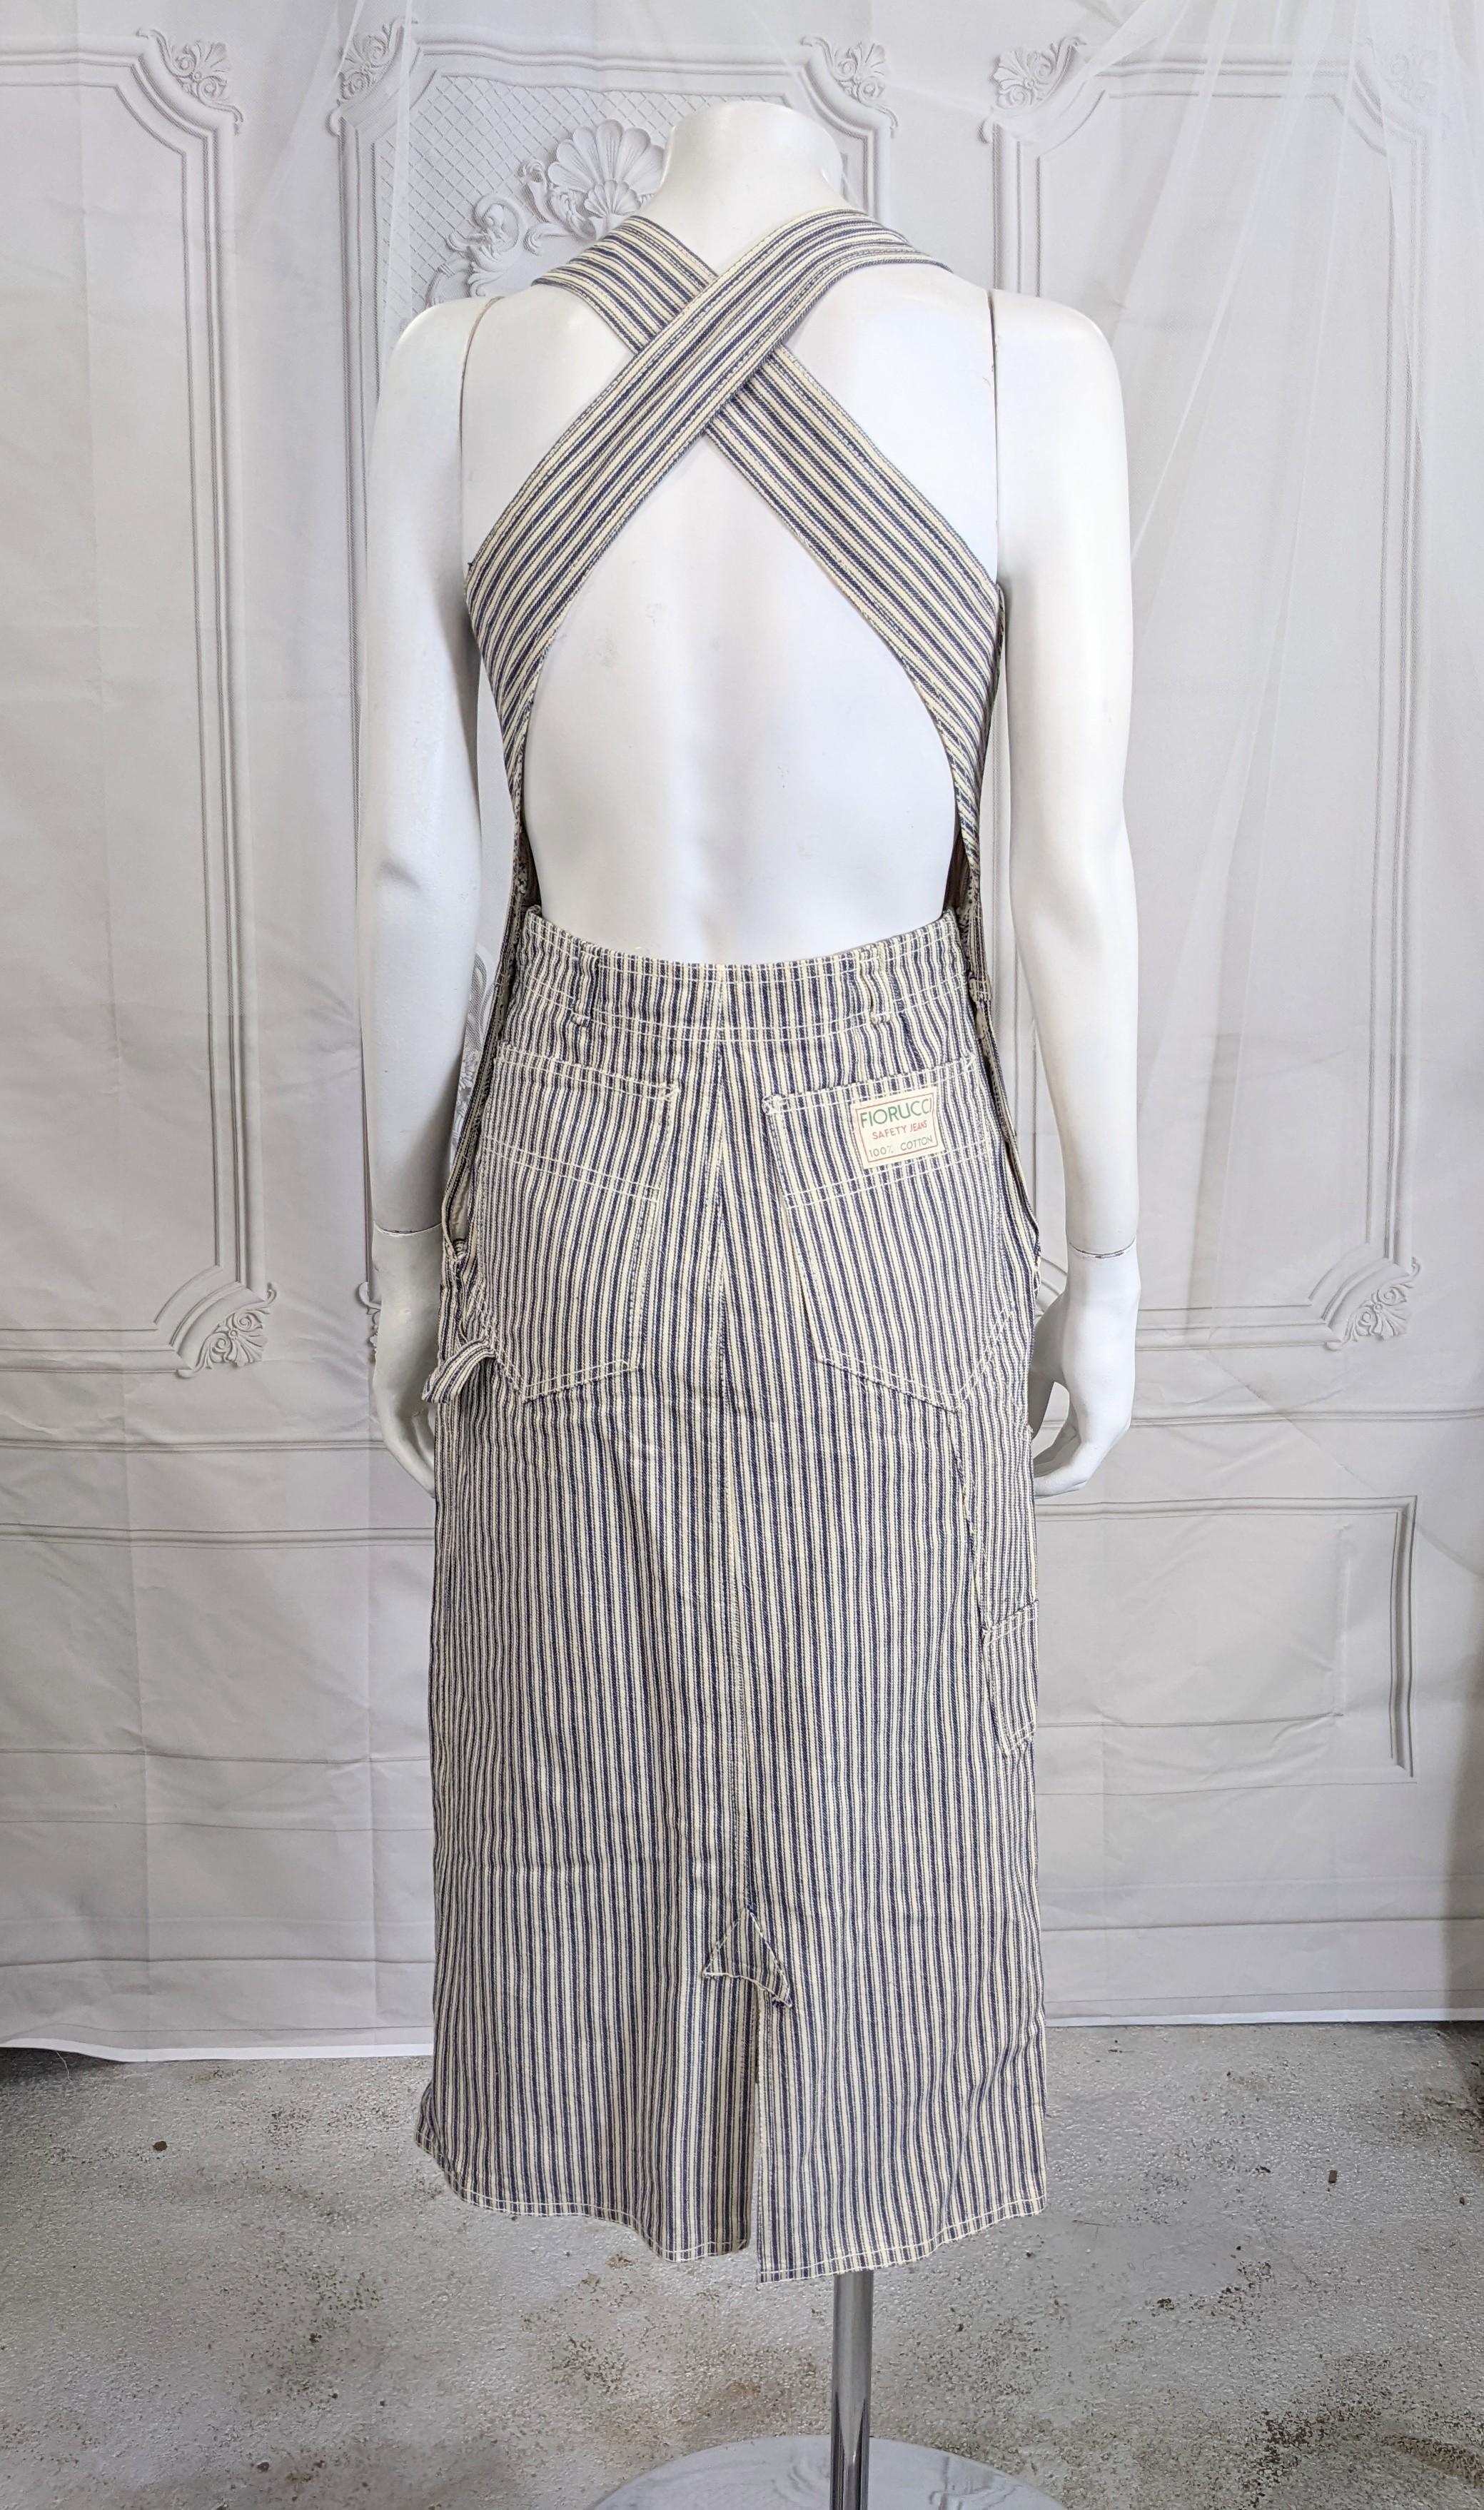 Fiorucci Denim Striped Overall Dress In Excellent Condition For Sale In New York, NY